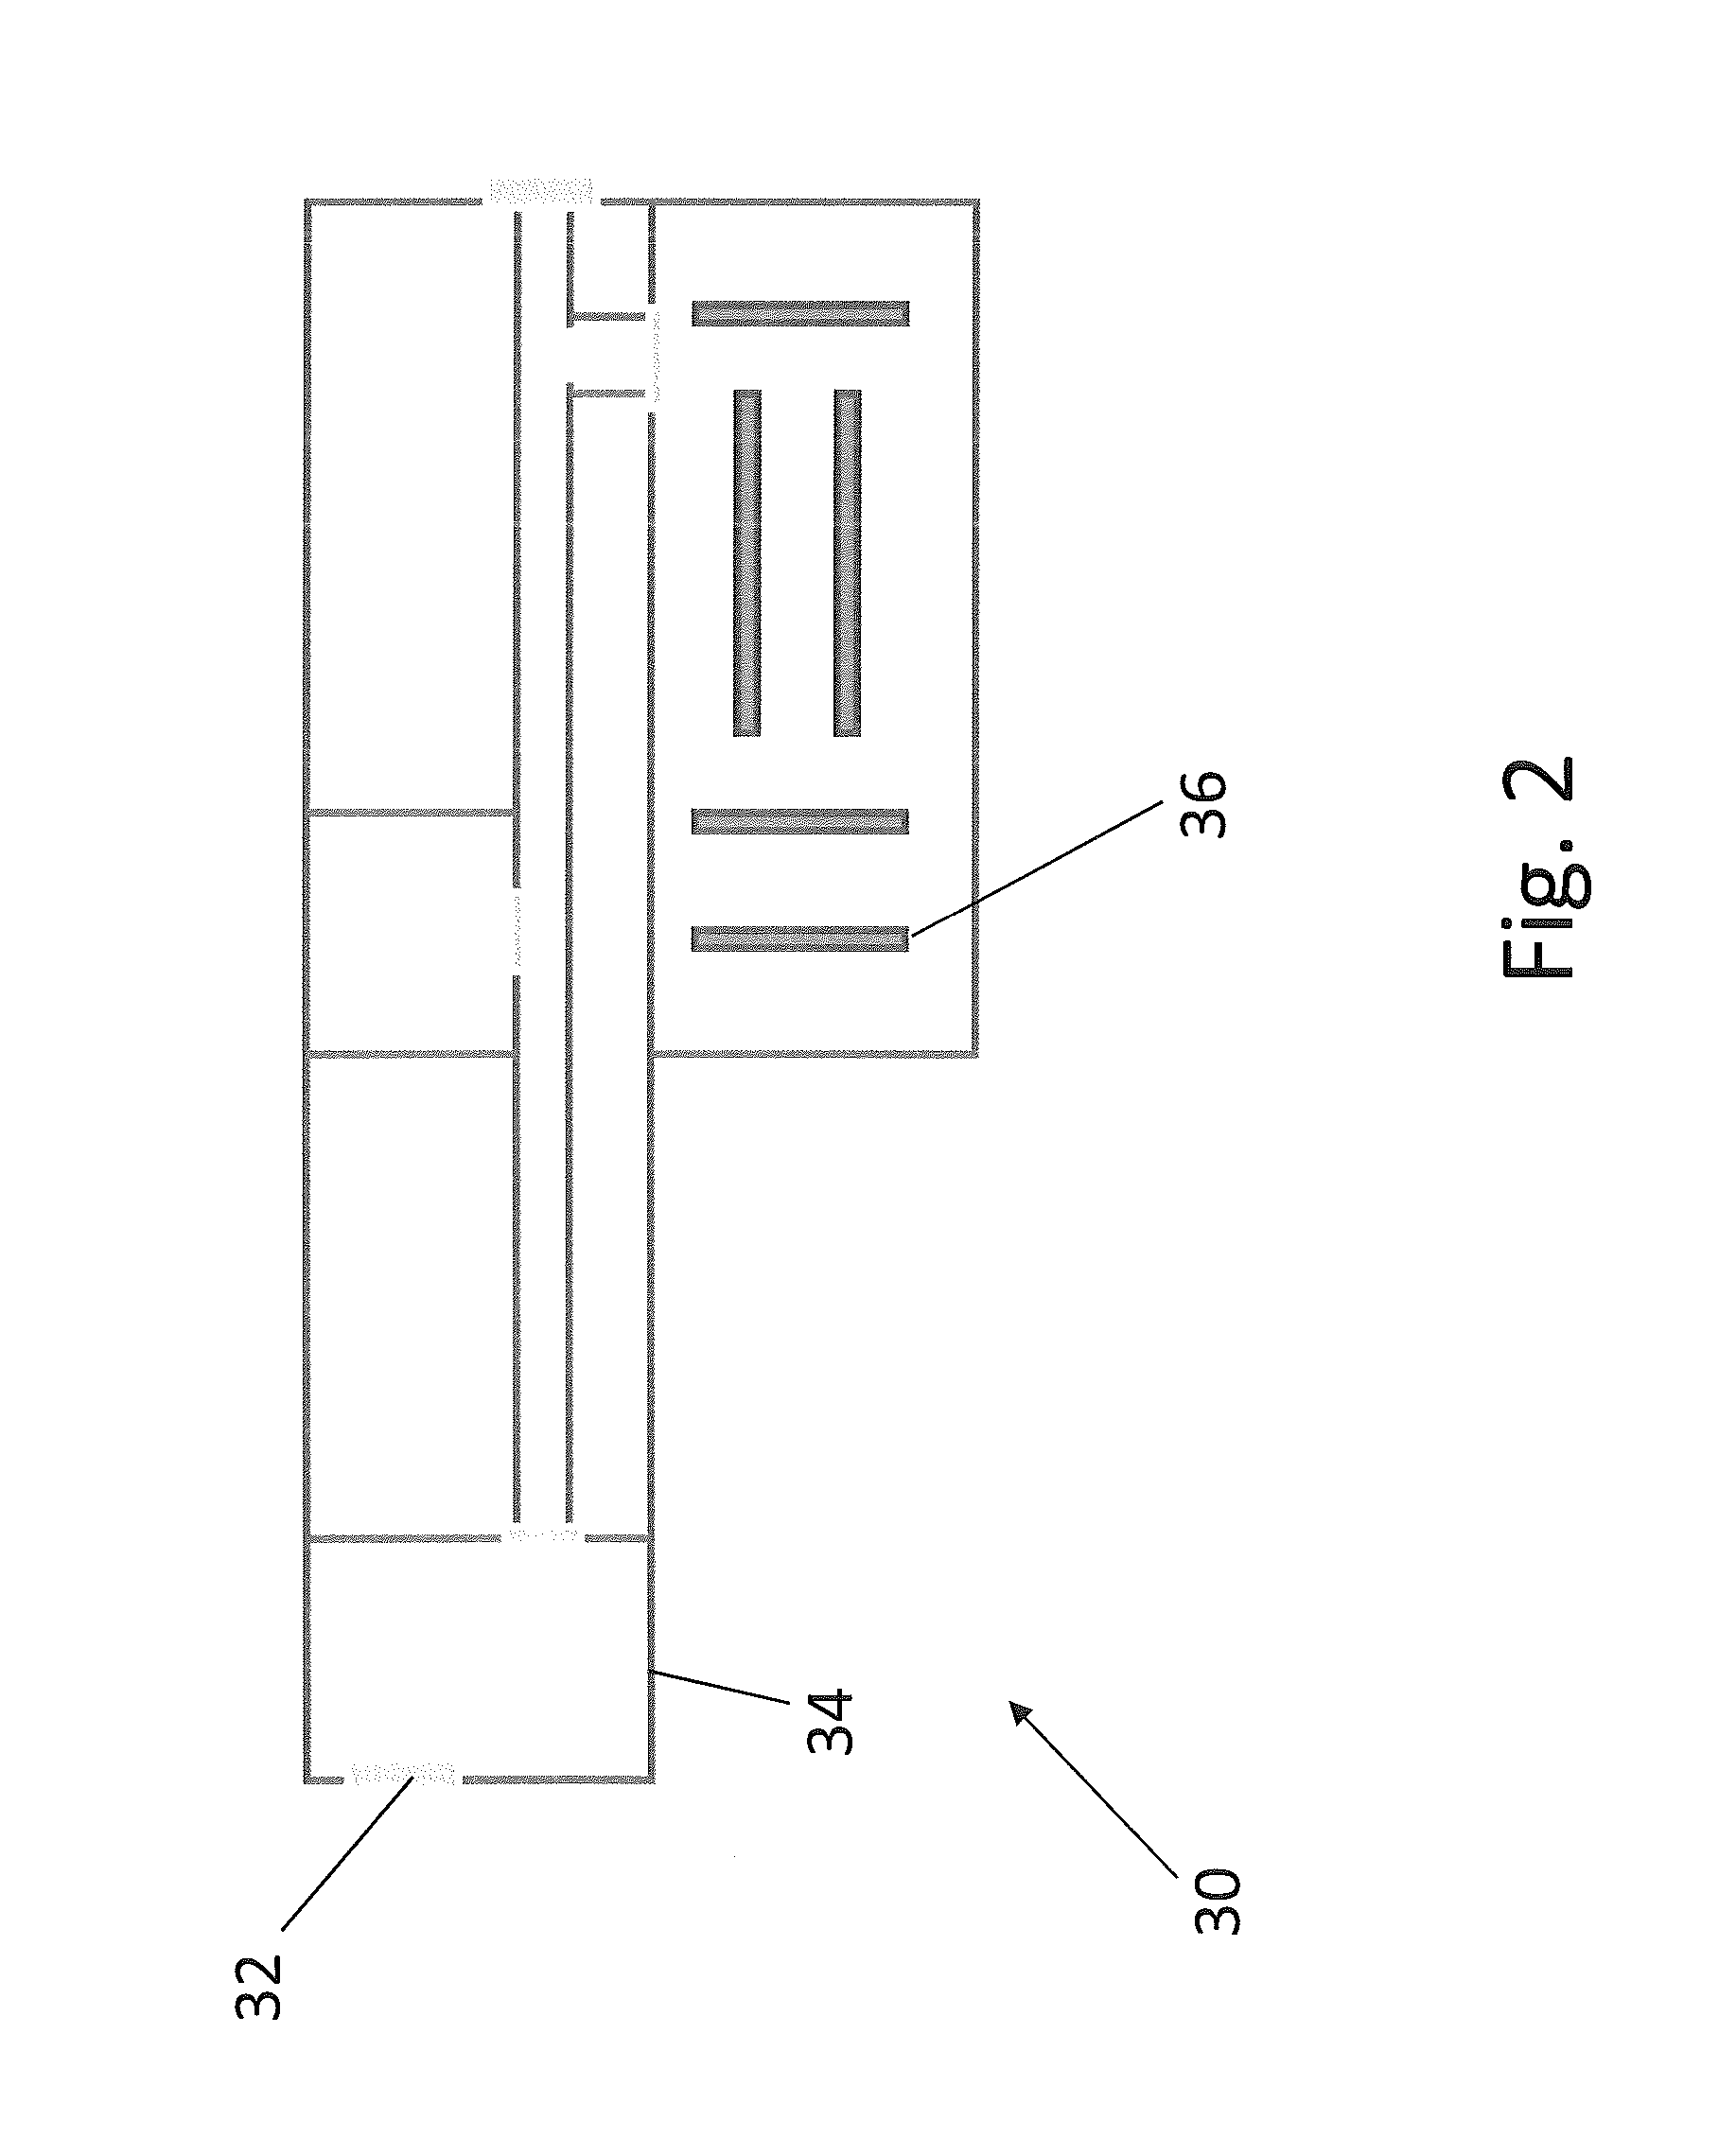 Method of estimating position of a device